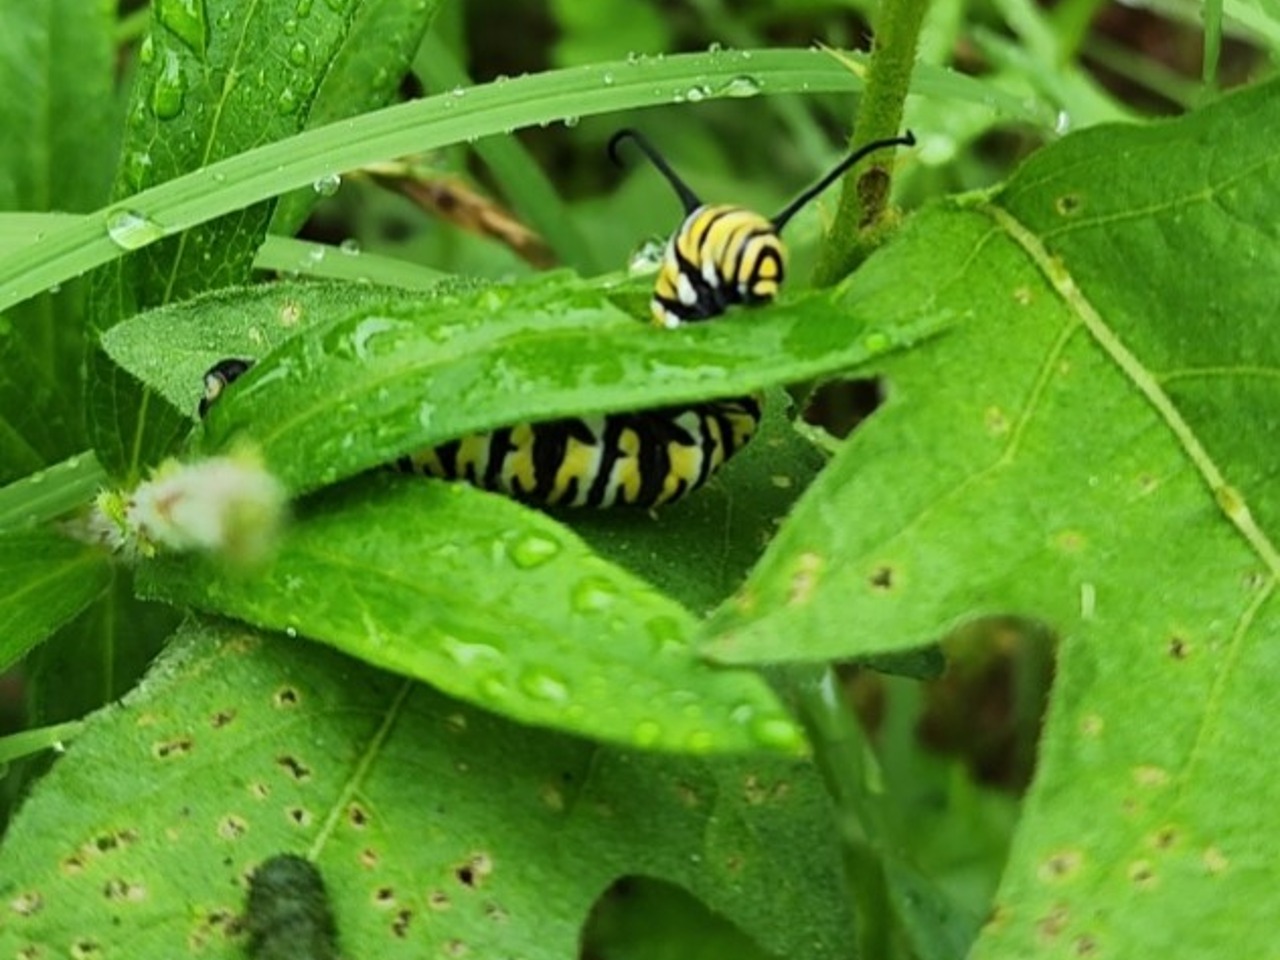 A large caterpillar tucked between two leaves